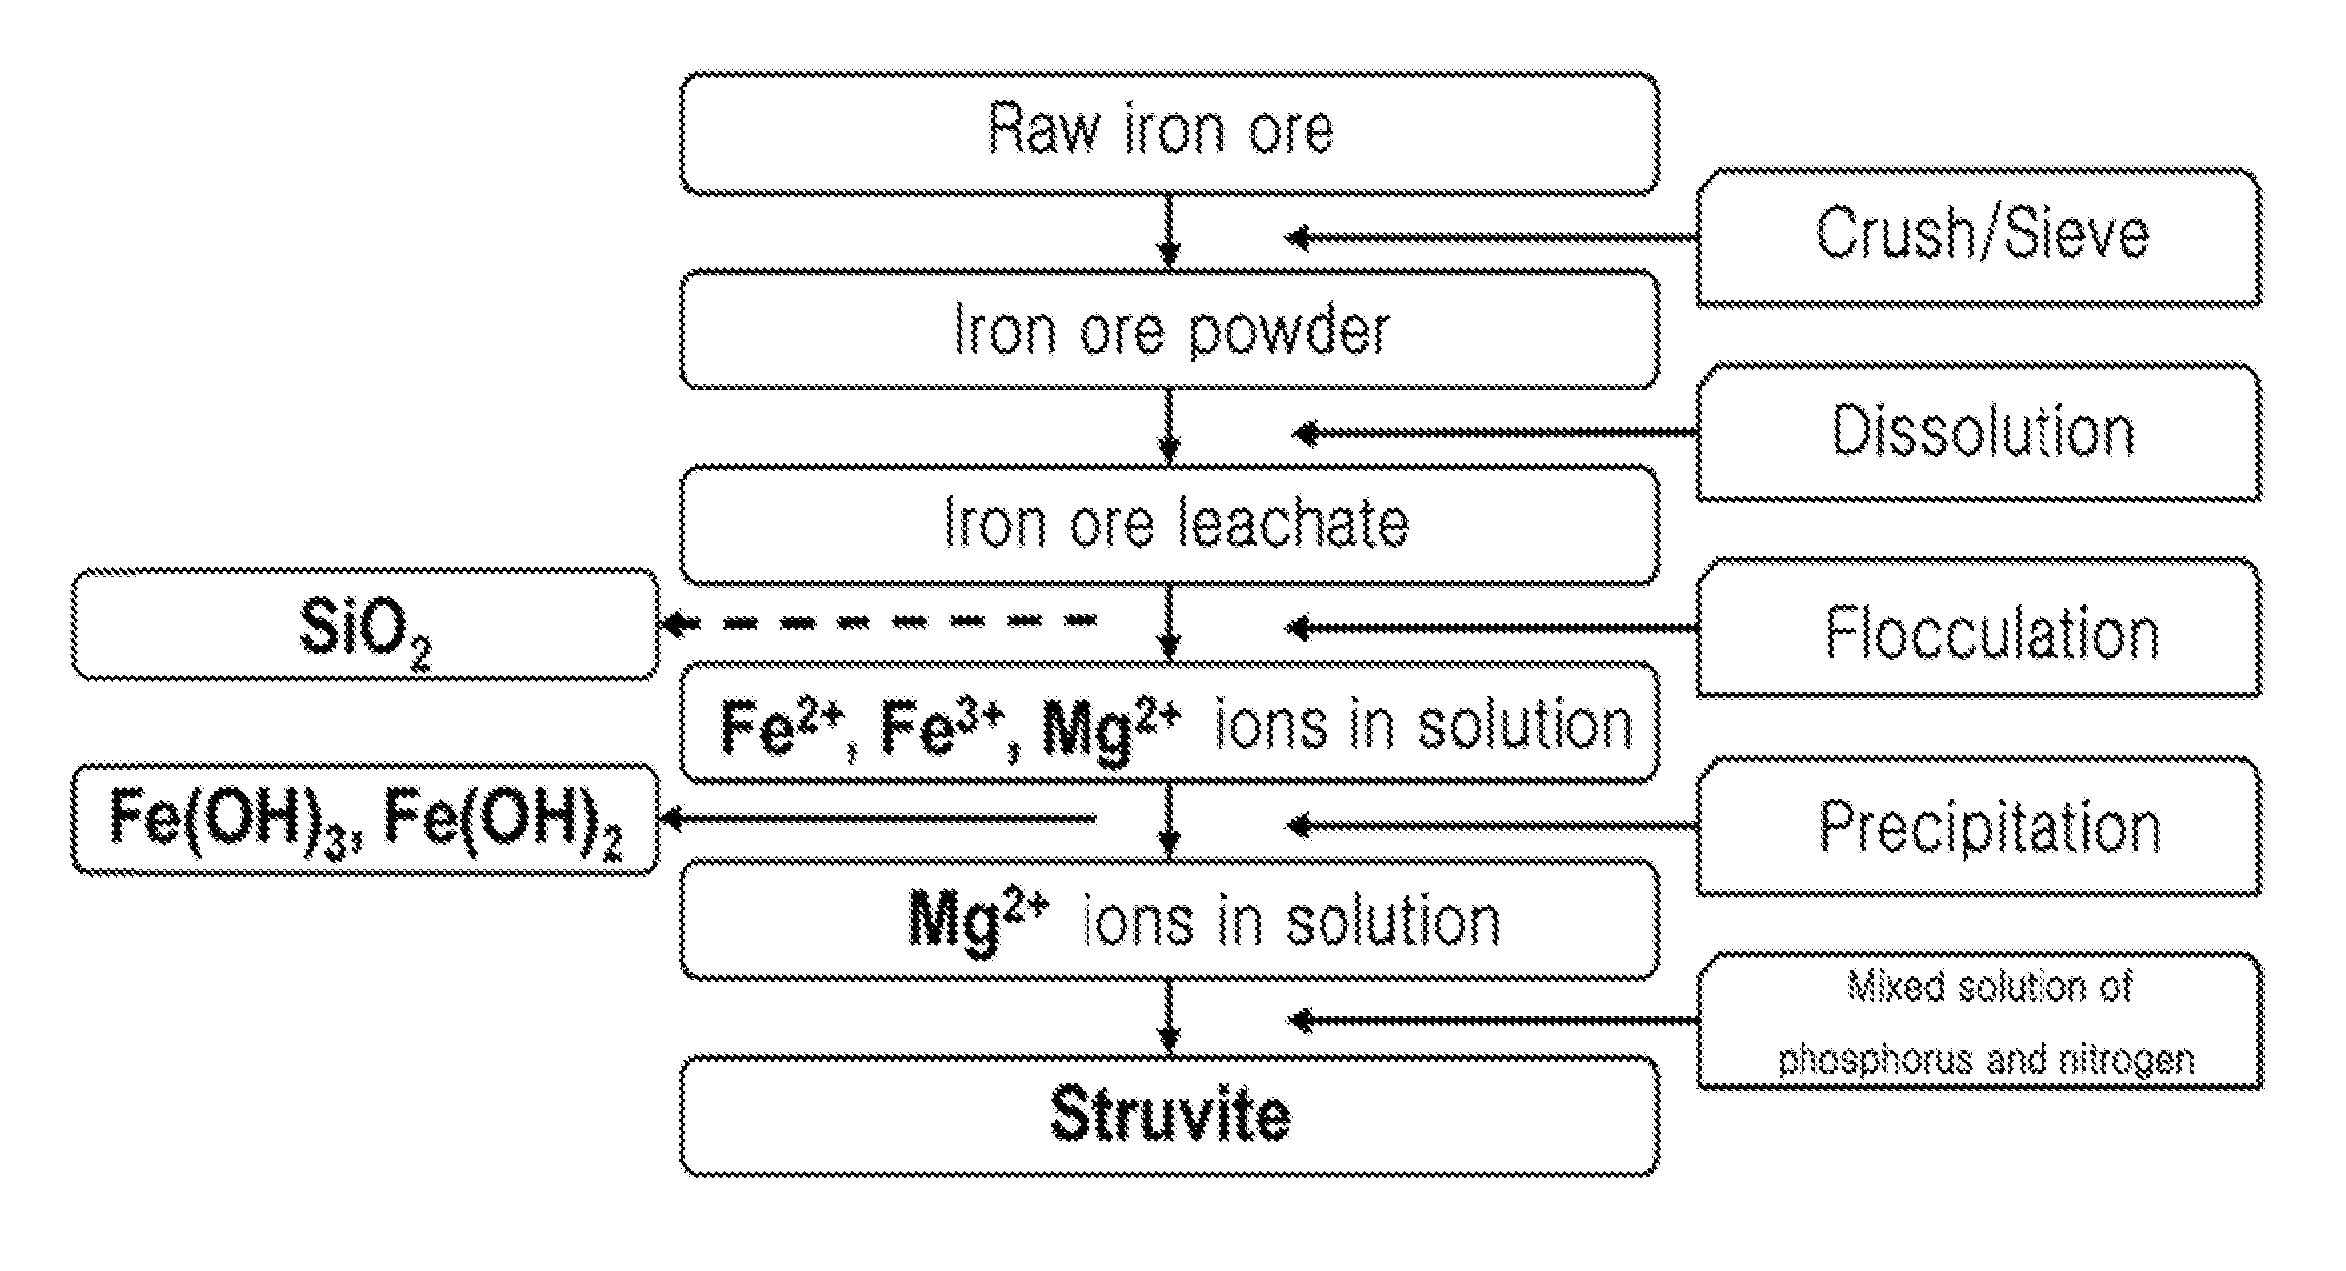 Method for Removing Phosphorus and Nitrogen Contained in Sewage or Wastewater Using Iron Ore Wastewater